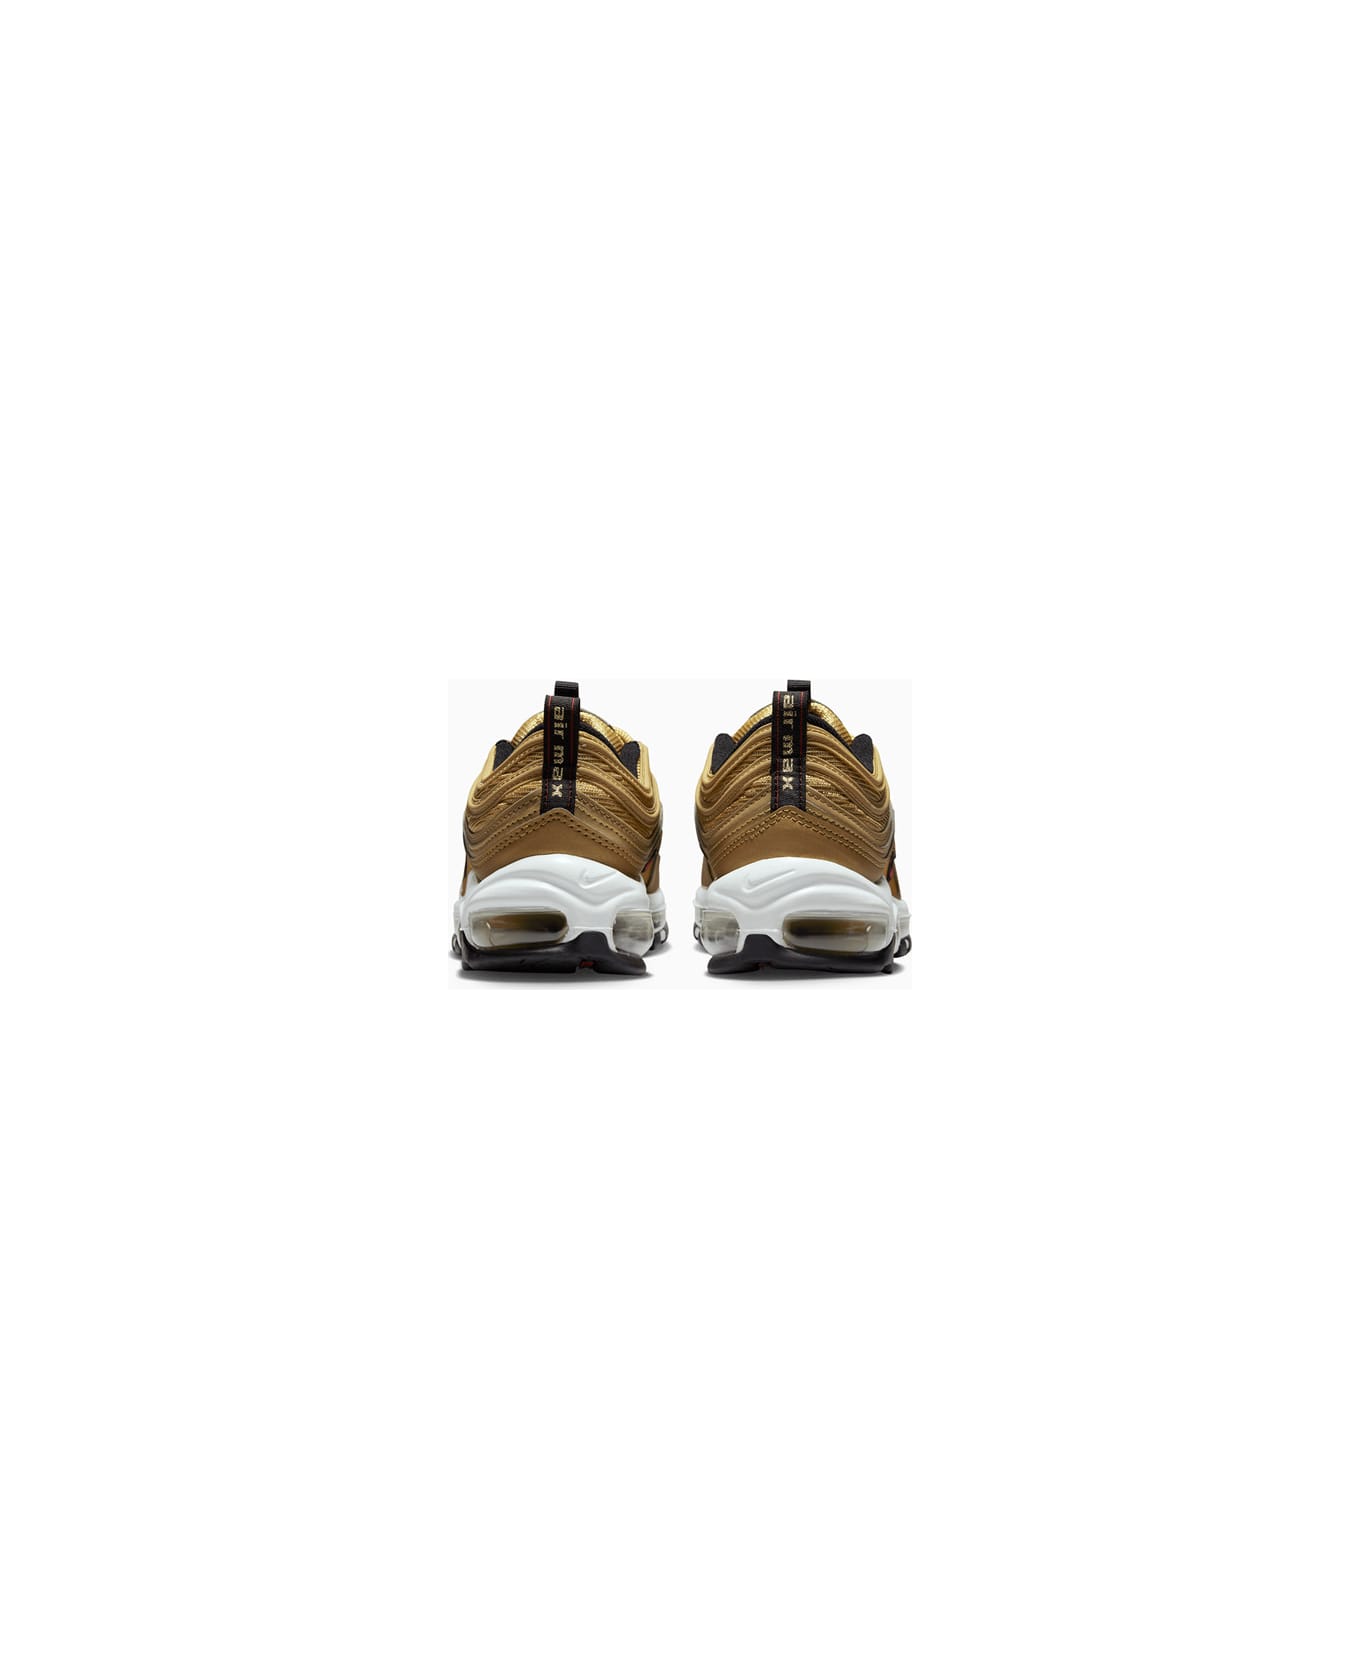 Nike Air Max 97 Og 'gold' Sneakers Dq9131-700 - Gold